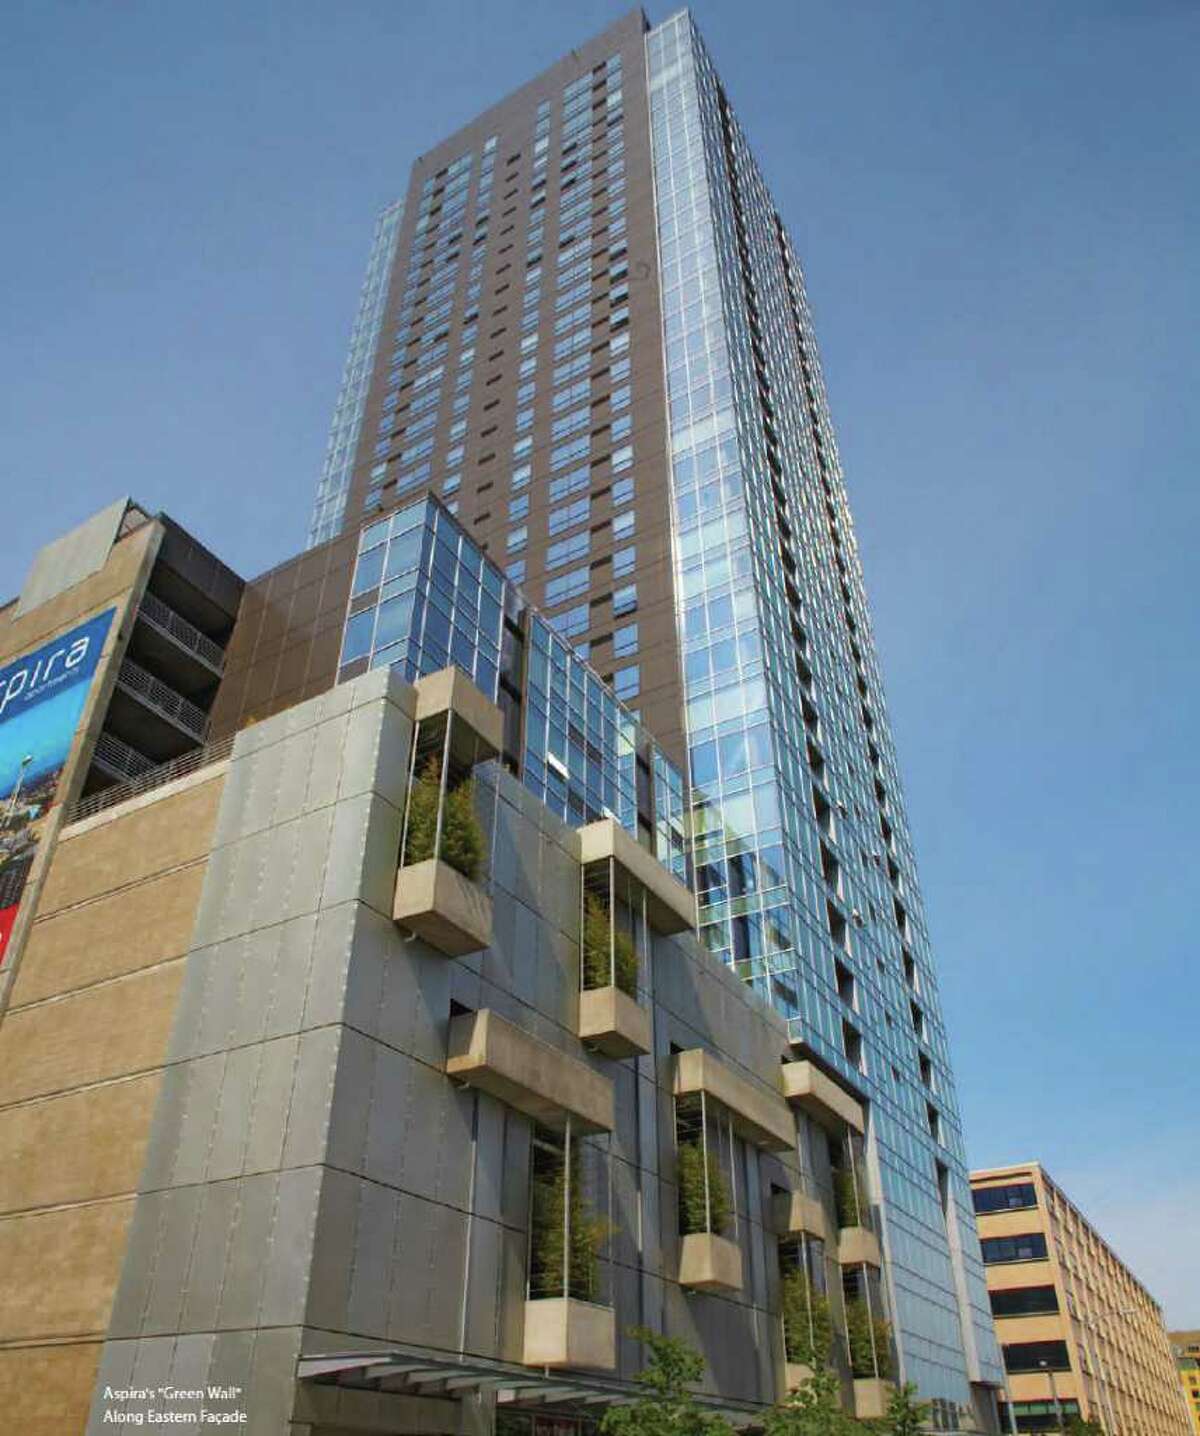 The developers of Aspira, a 37-story, 324-unit apartment building at 1823 Terry Ave., just put the tower up for sale. The tower, completed last year, aims to appeal to young professionals.